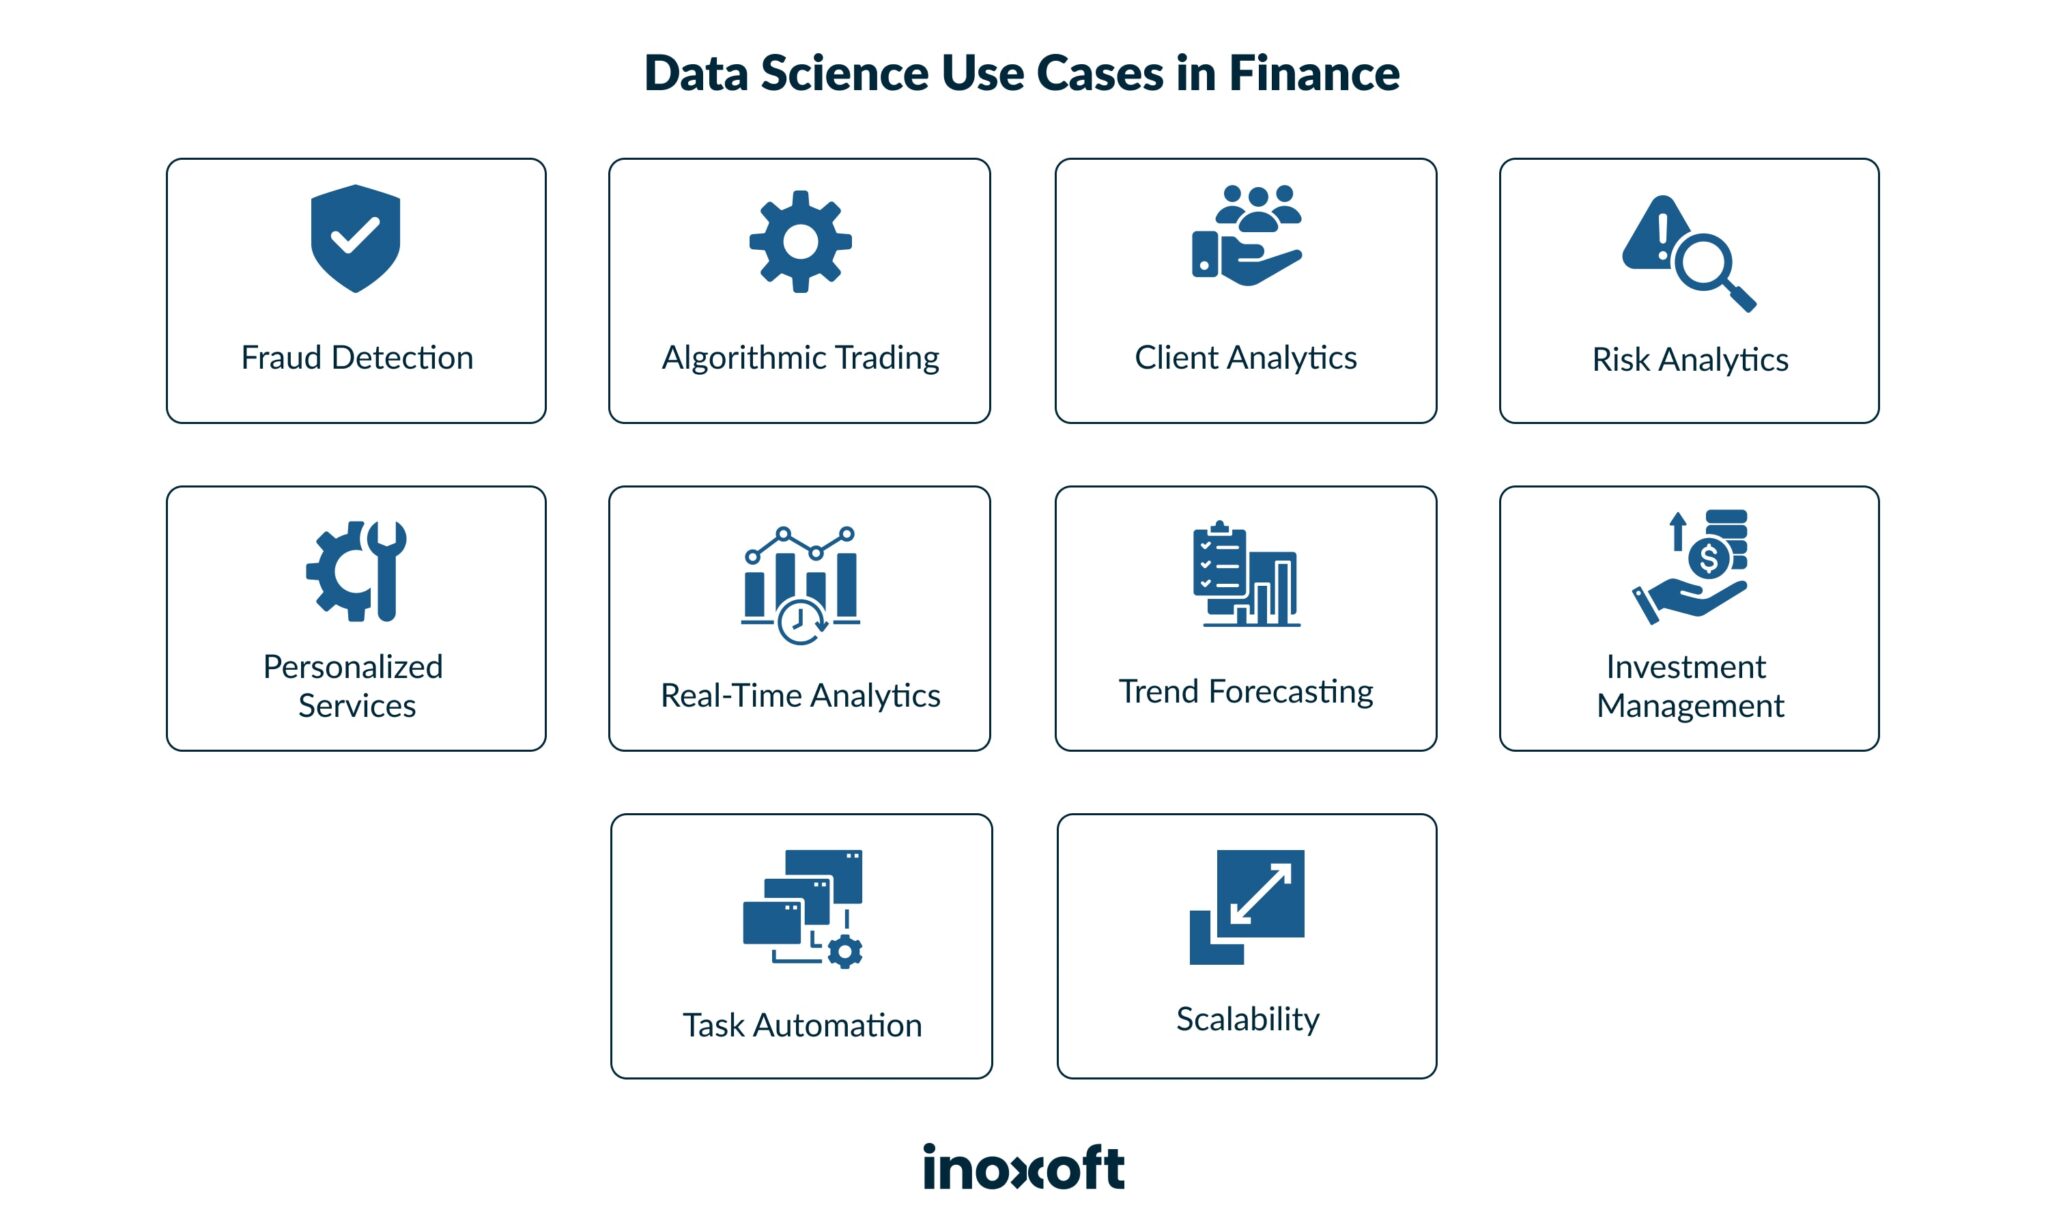 Data Science Use Cases in Finance